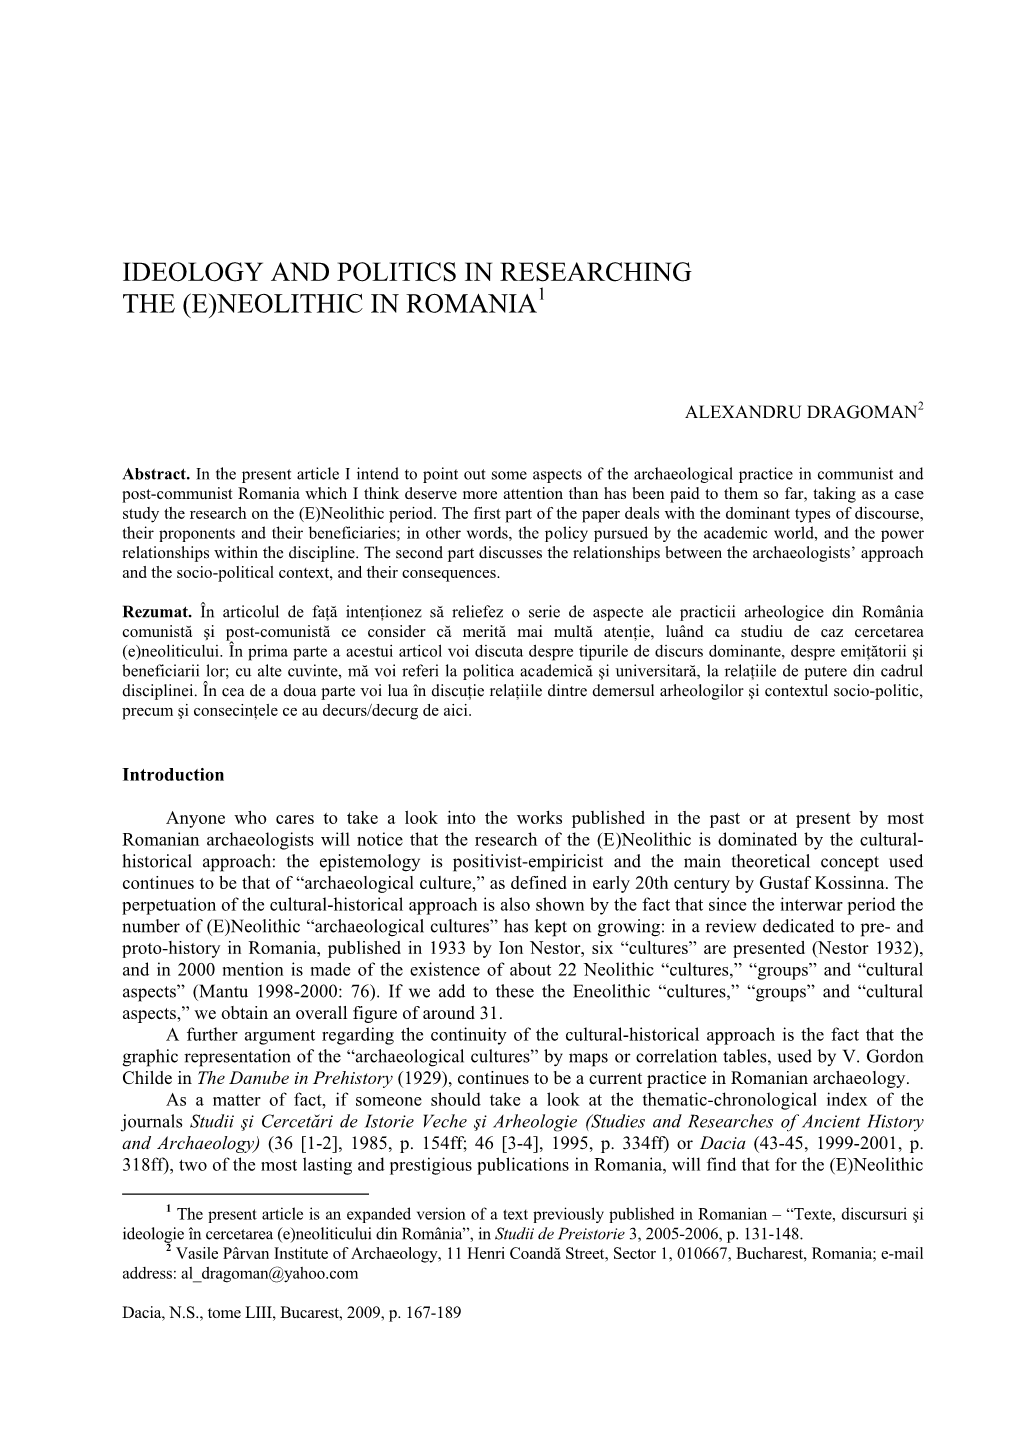 Ideology and Politics in Researching the (E)Neolithic in Romania1